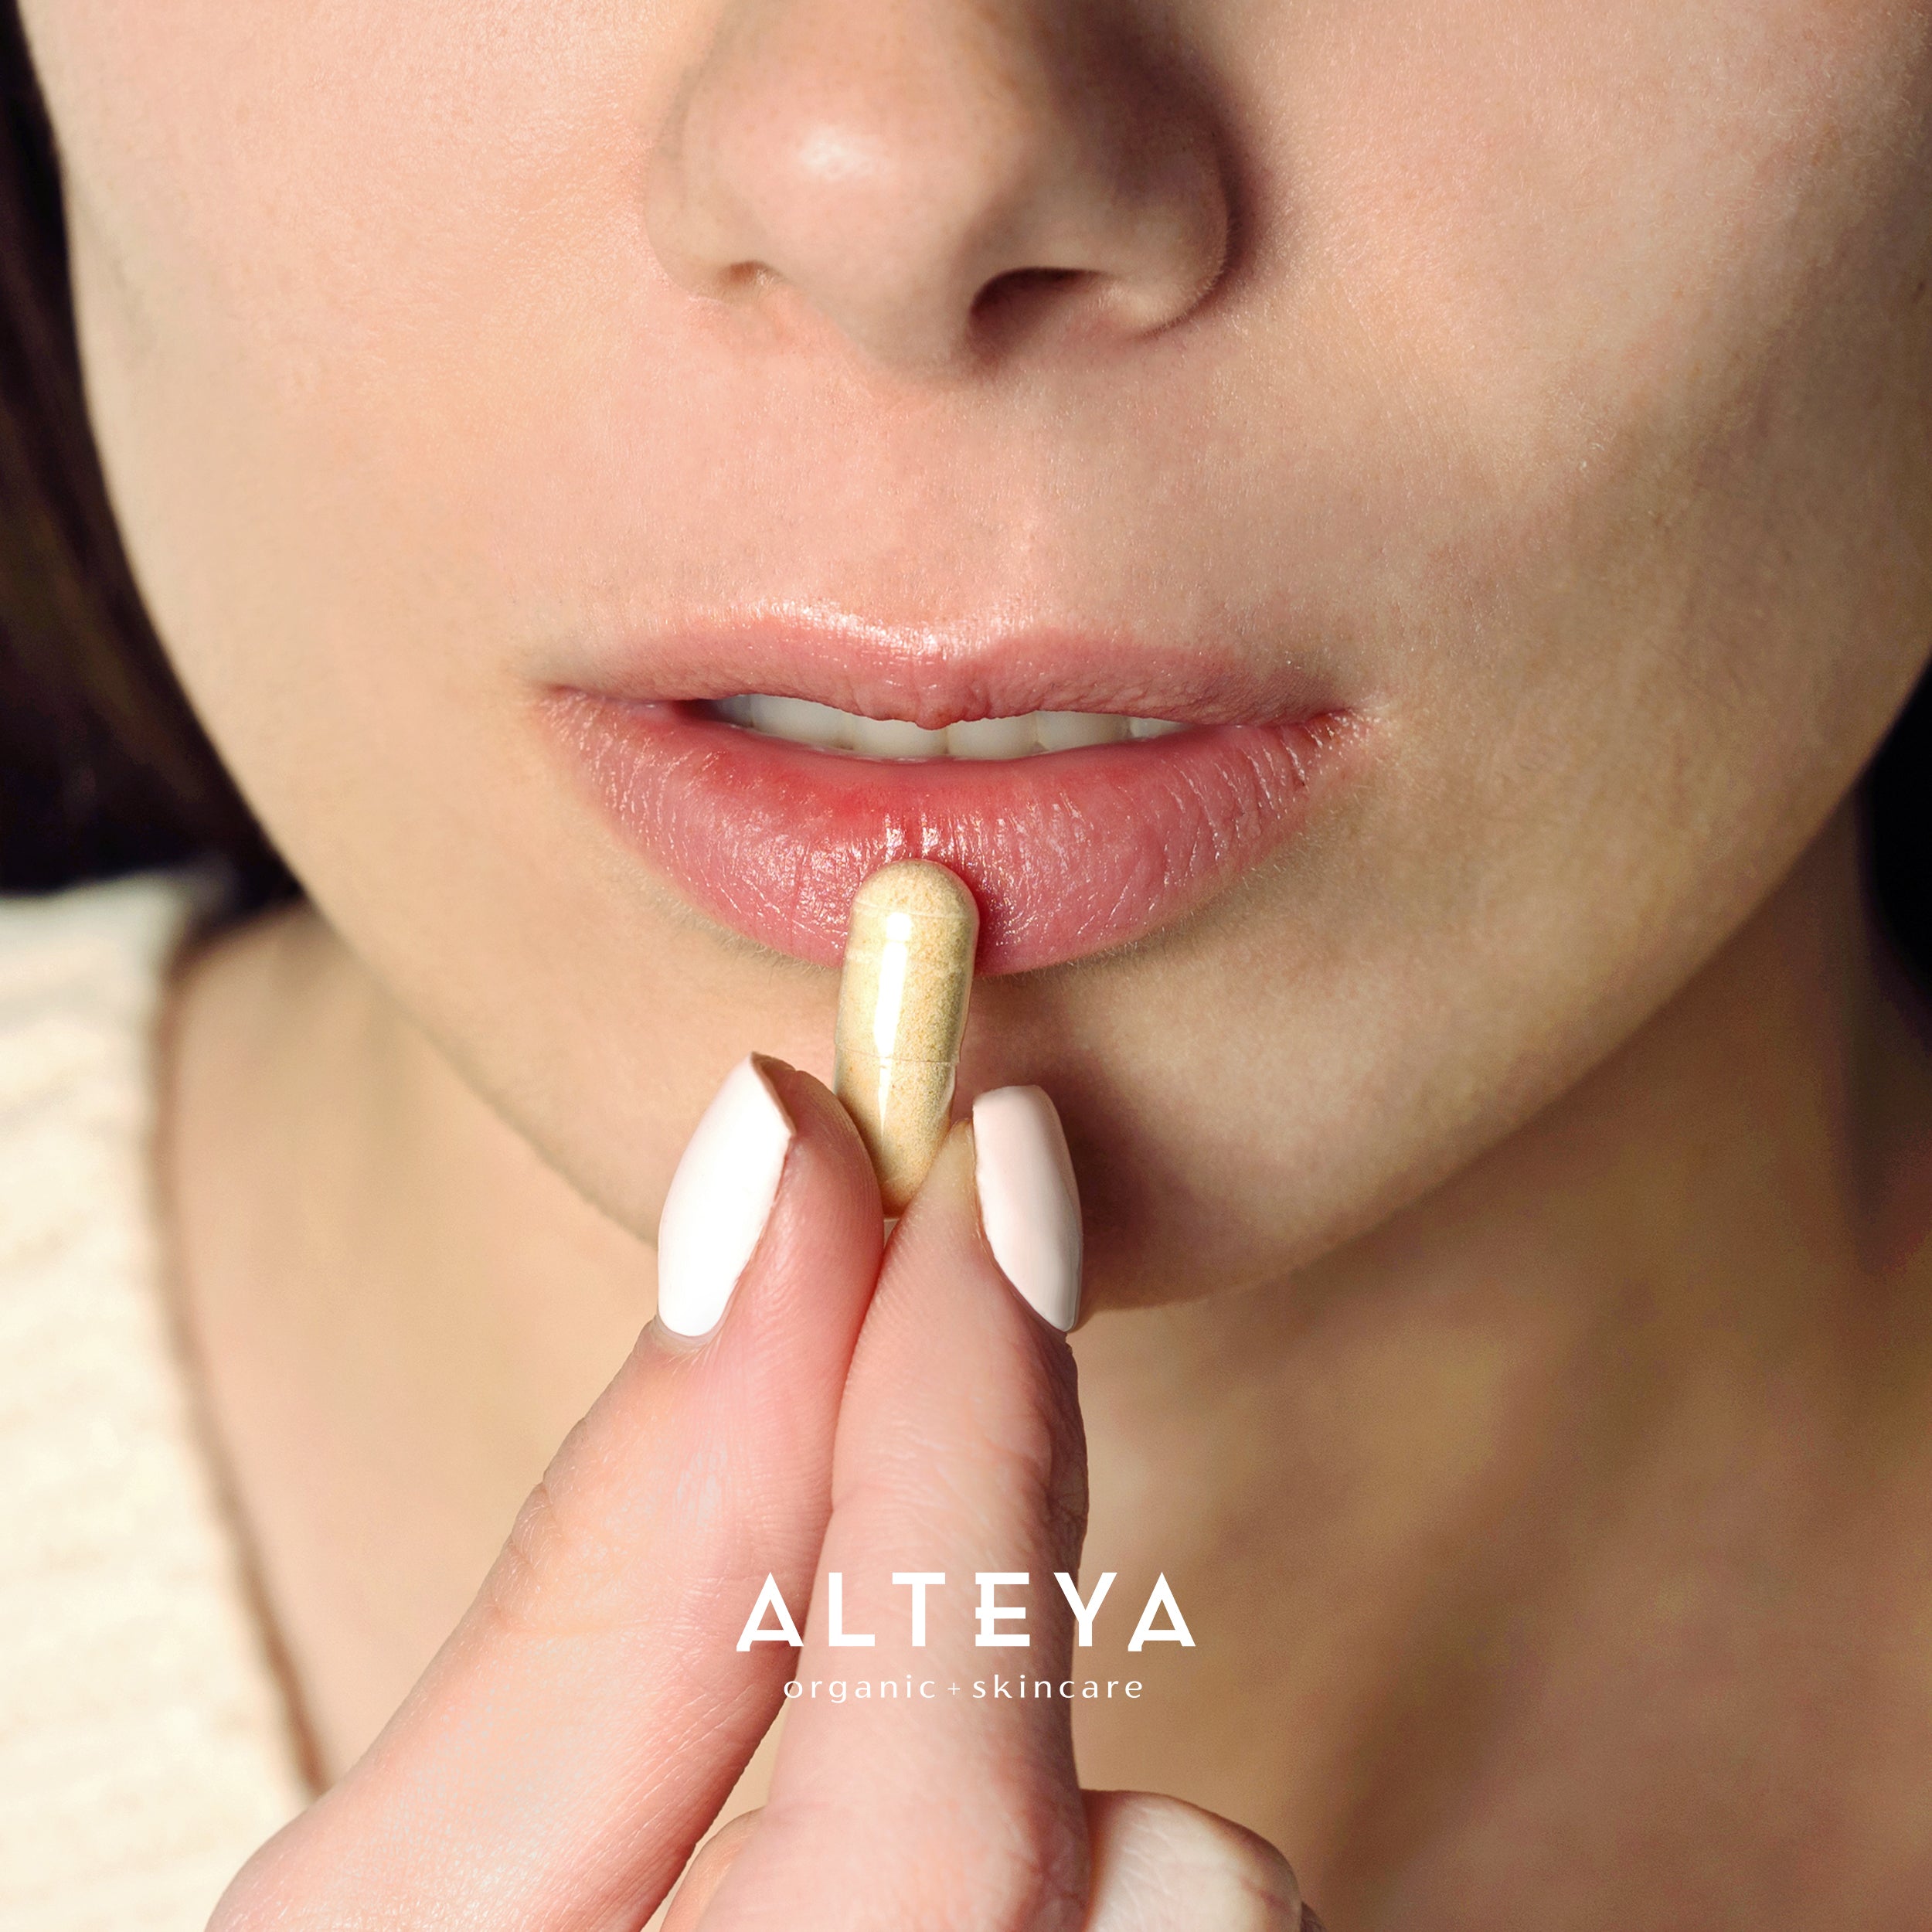 A woman is holding Alteya Organics' Rose Beauty Prebiotic and Probiotic - Synbiotic Skin & Metabolism Vegan Organic Supplement in her mouth, promoting gut health.